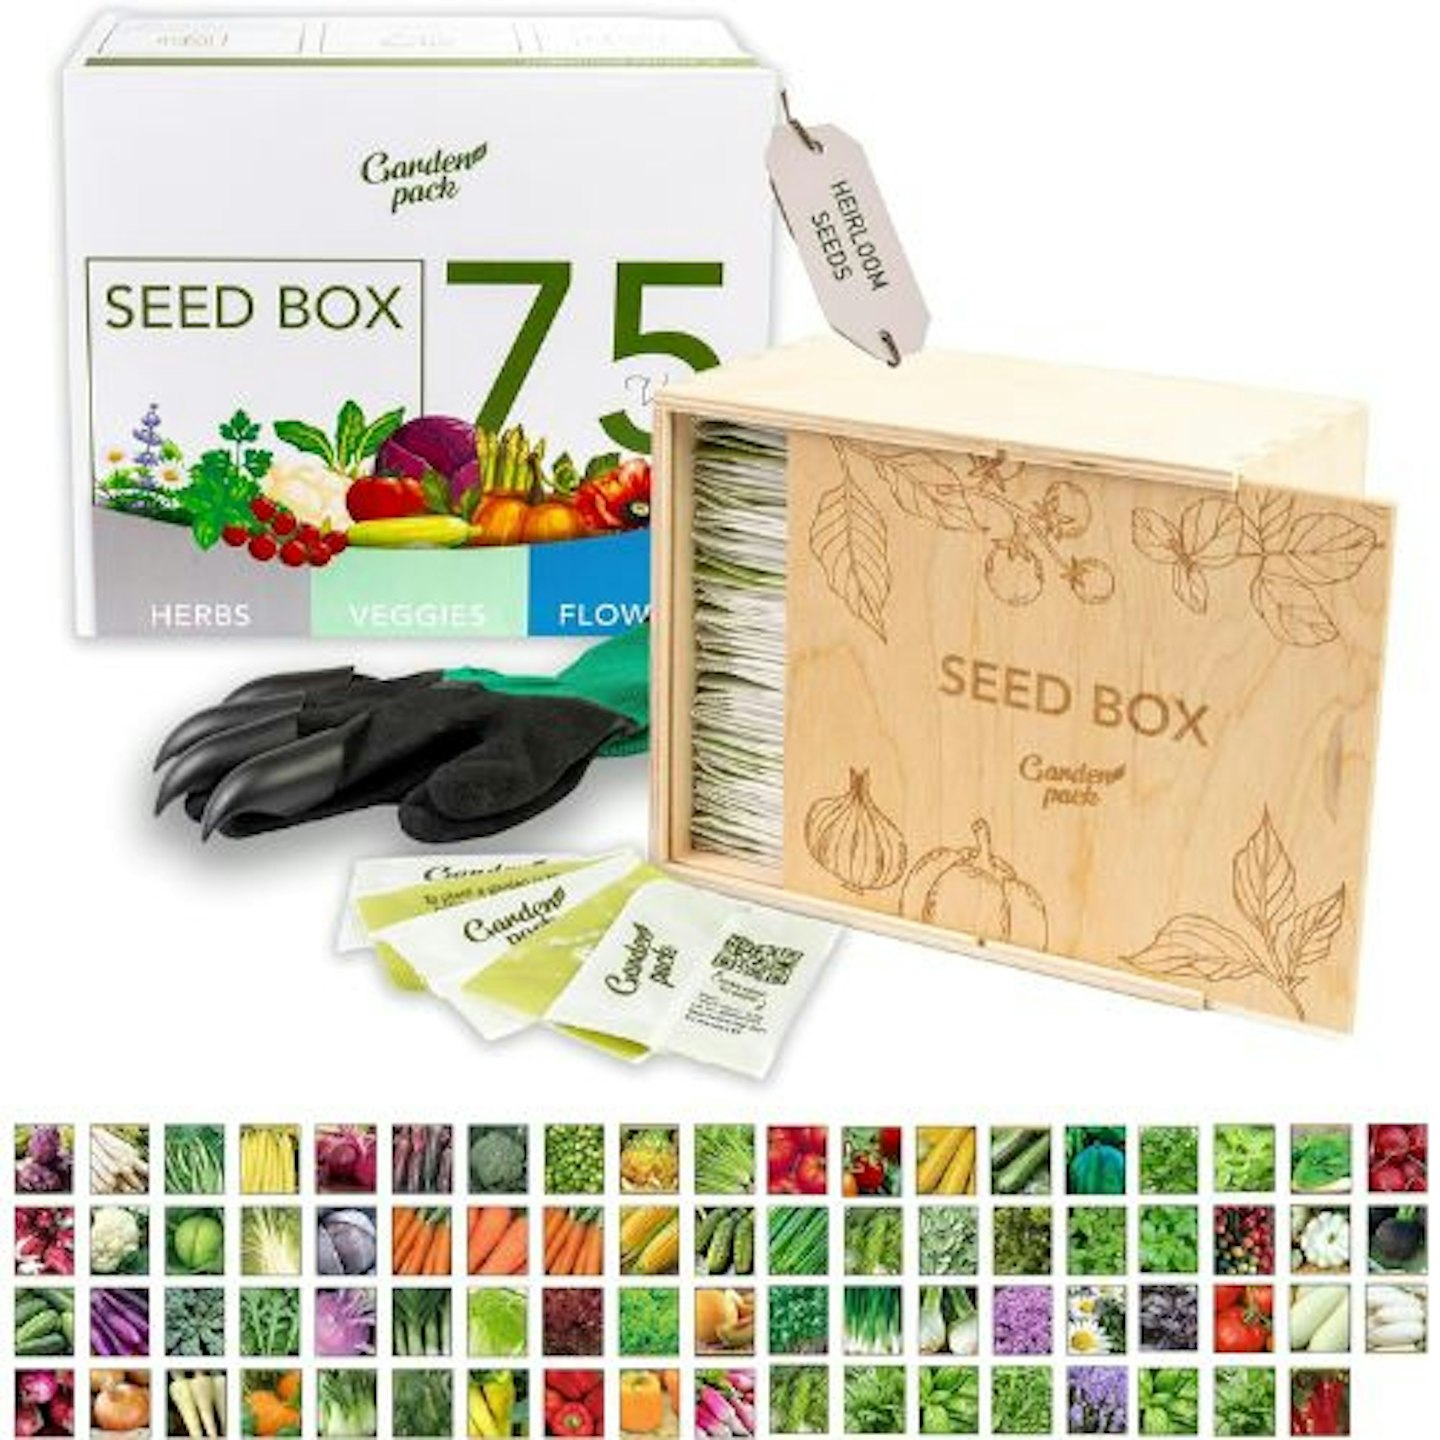 Grow Your Own Seed Box by Garden Pack